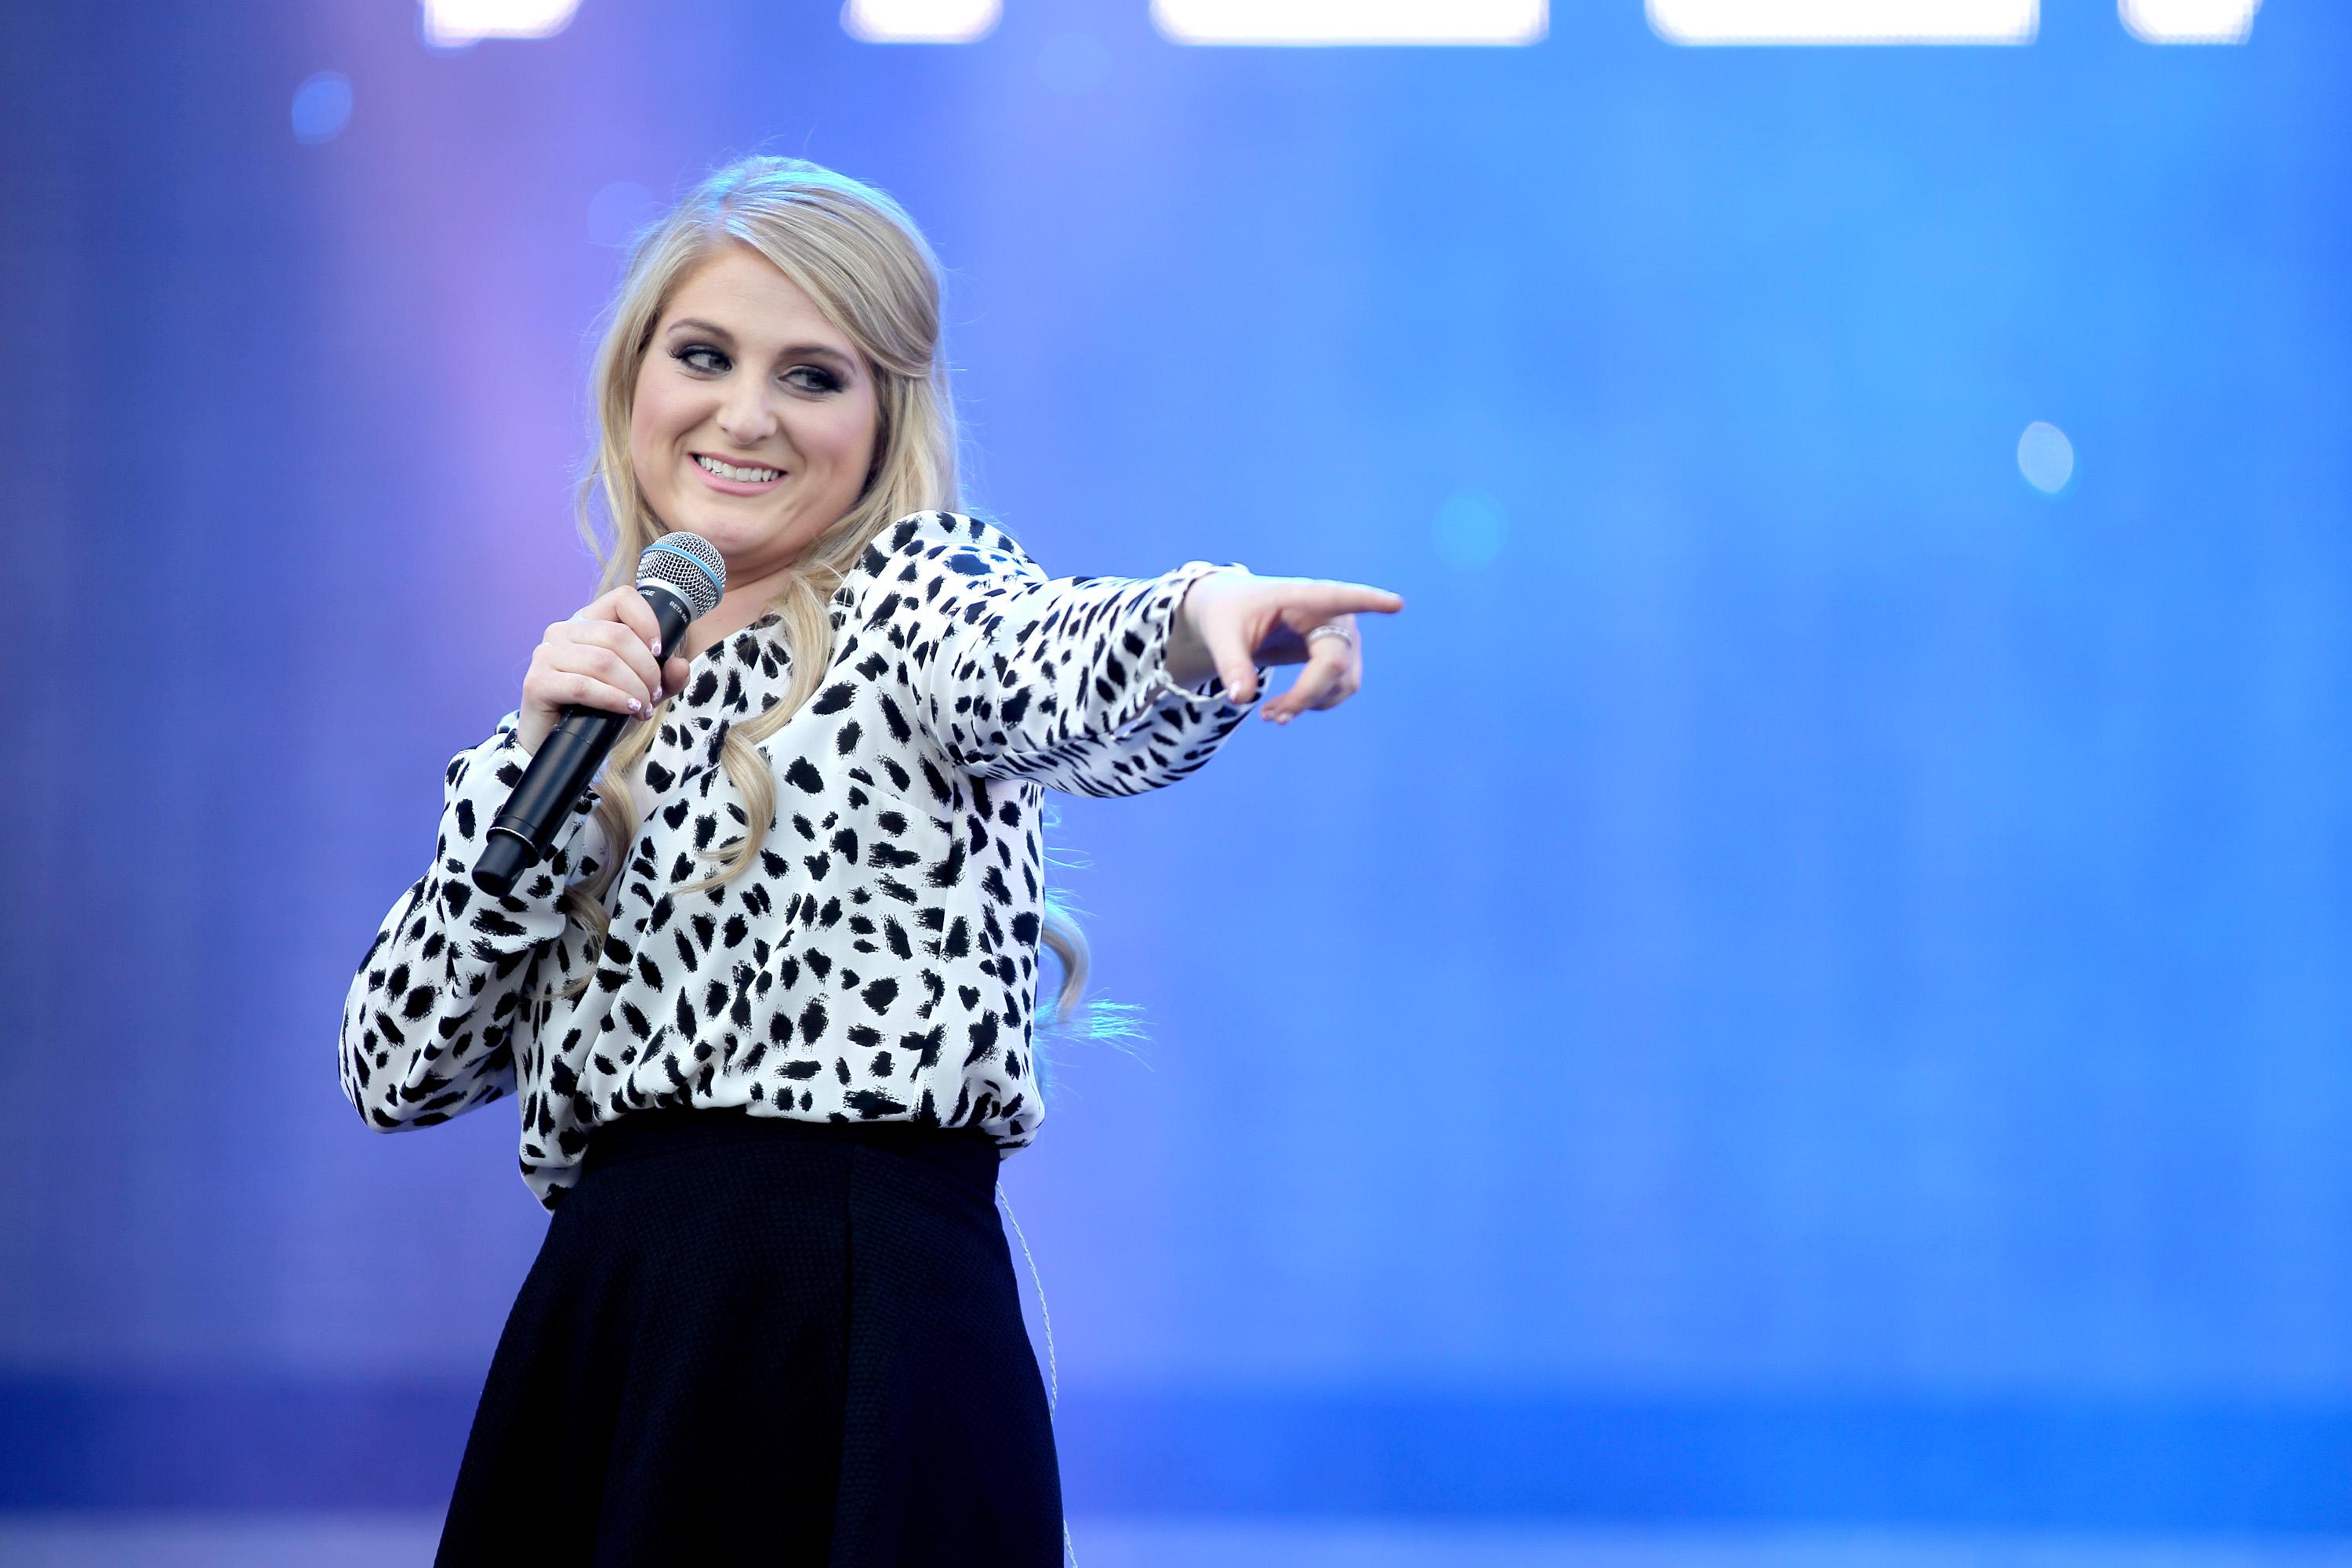 Meghan Trainor Title: 'All About That Bass' Debut Album Disappoints